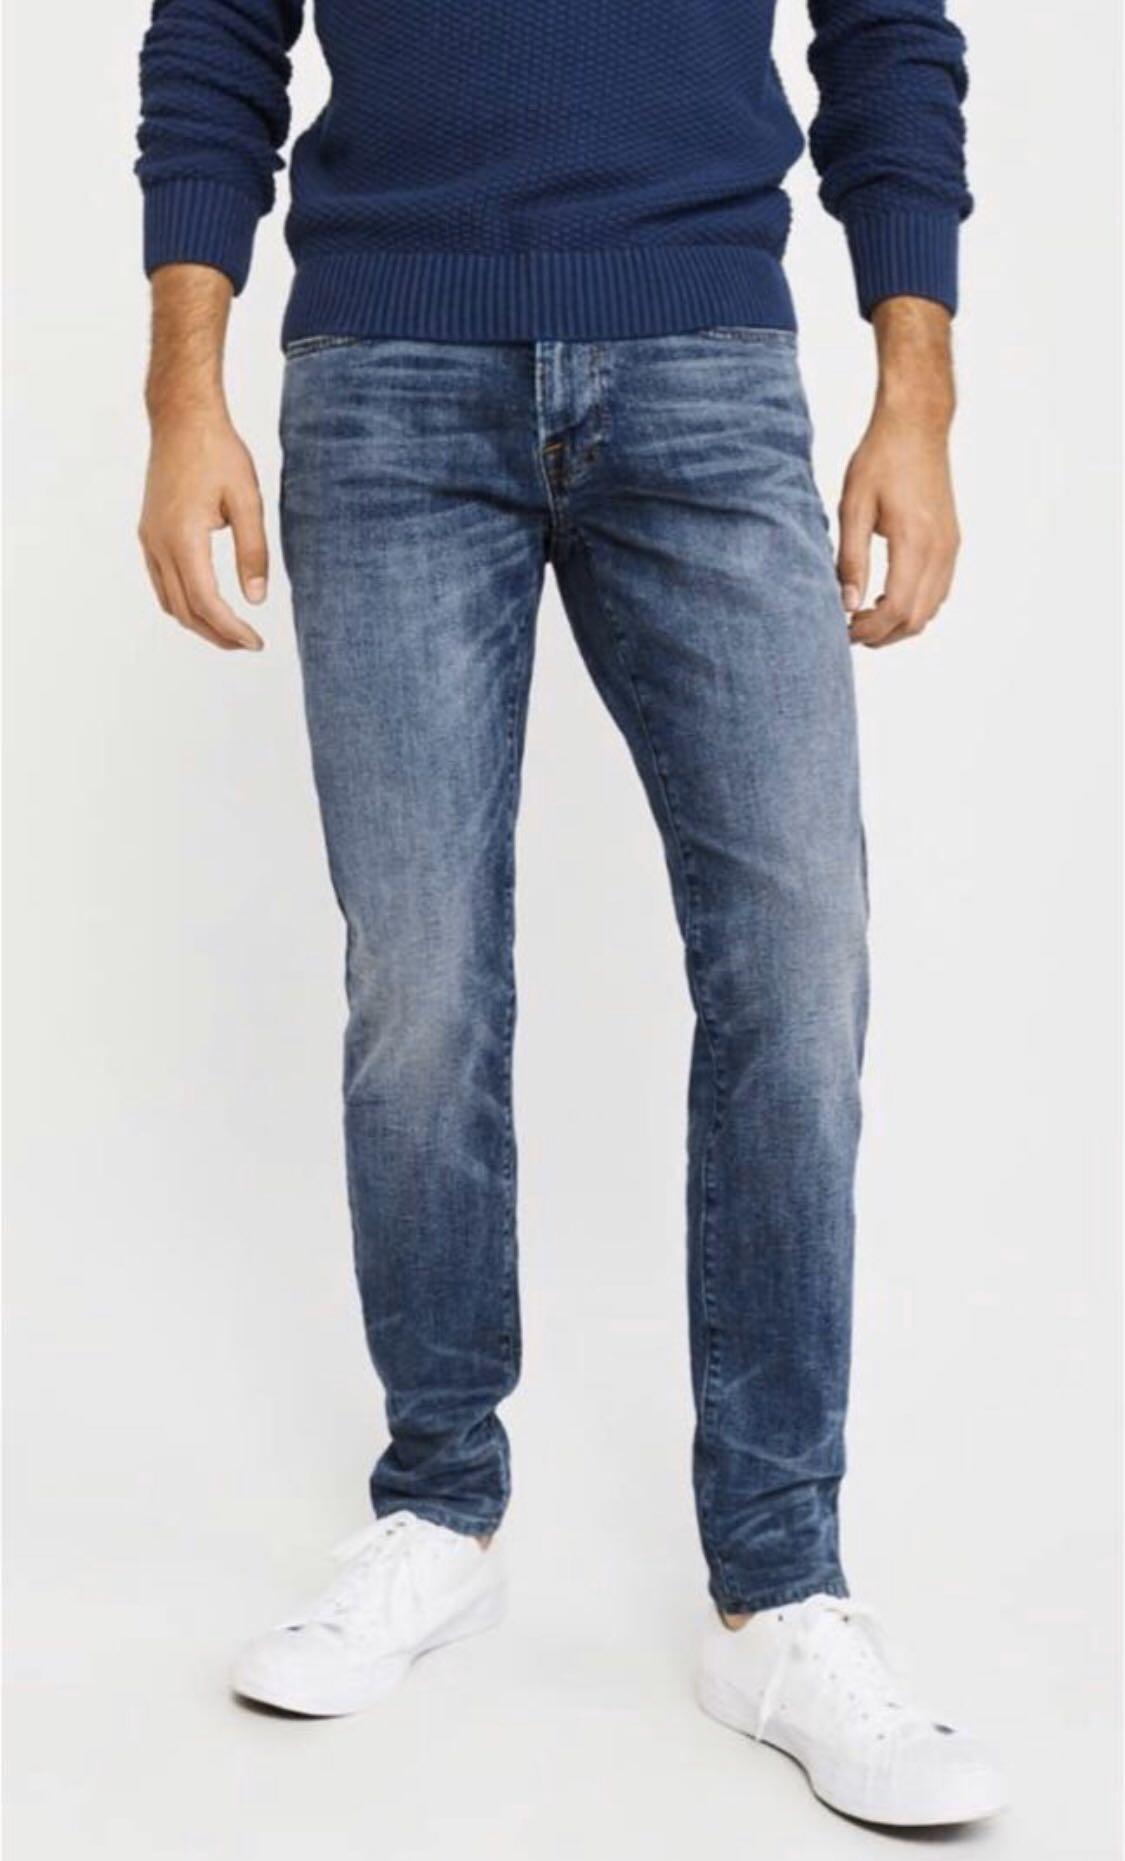 a&f jeans price